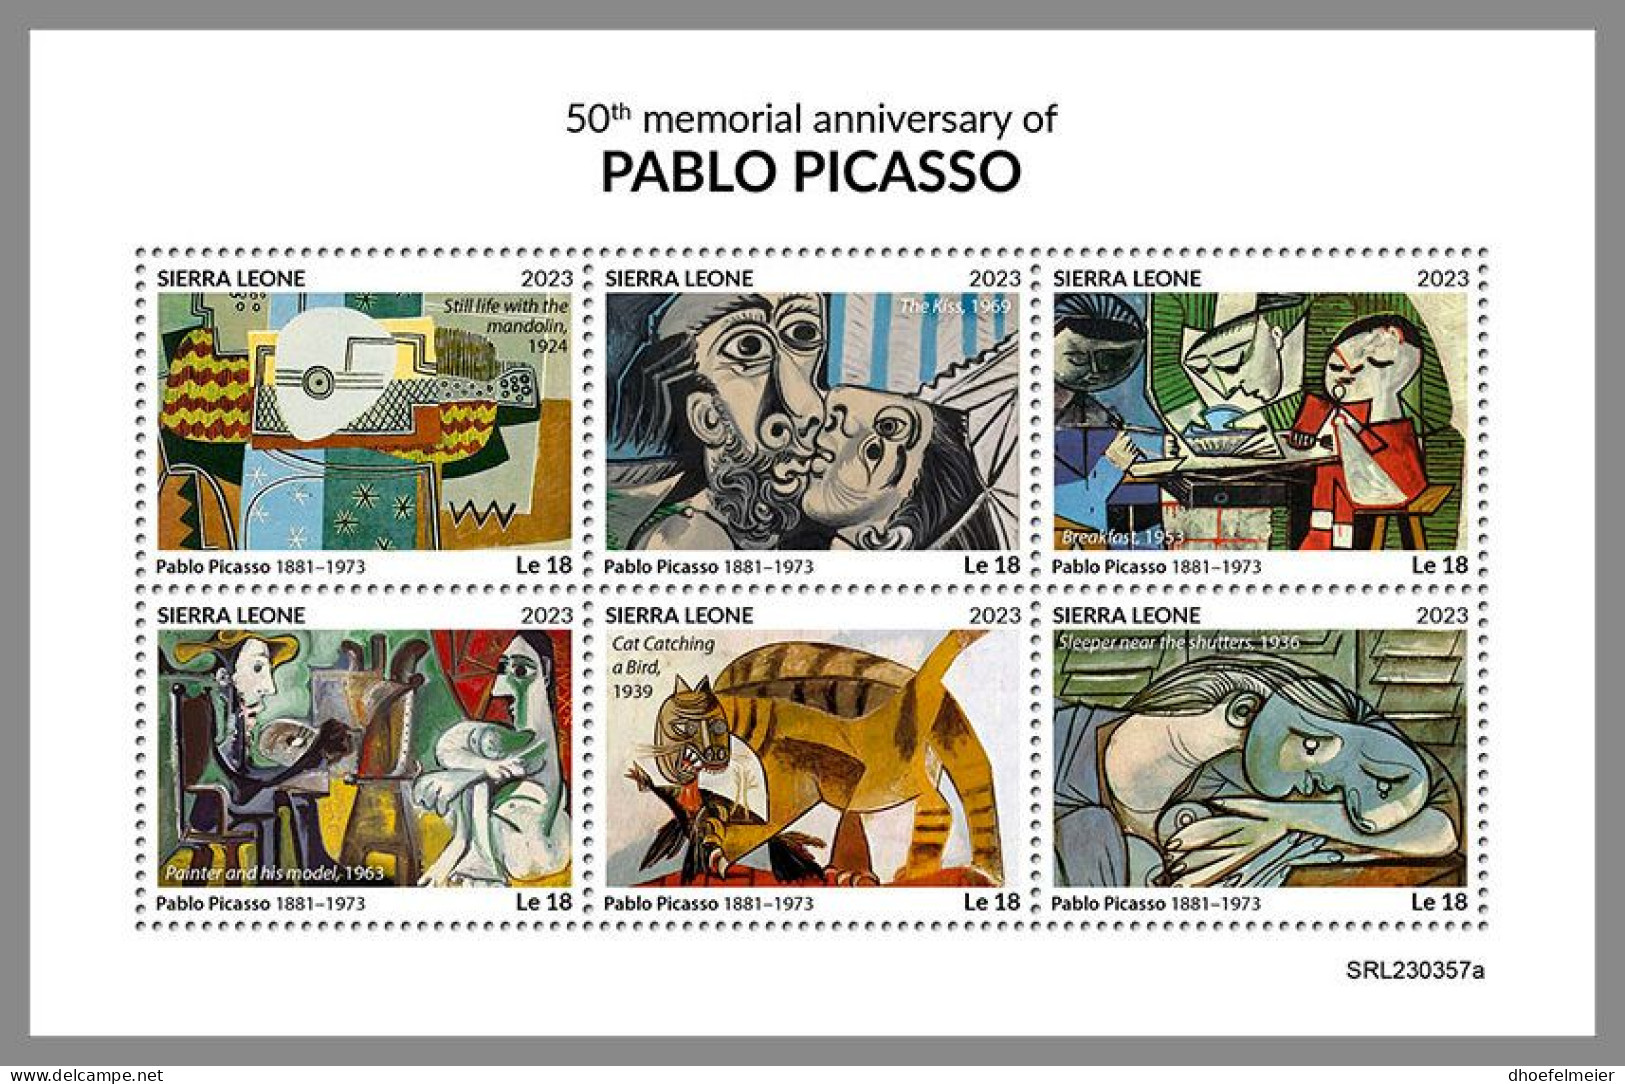 SIERRA LEONE 2023 MNH Pablo Picasso Paintings Gemälde M/S – IMPERFORATED – DHQ2347 - Picasso